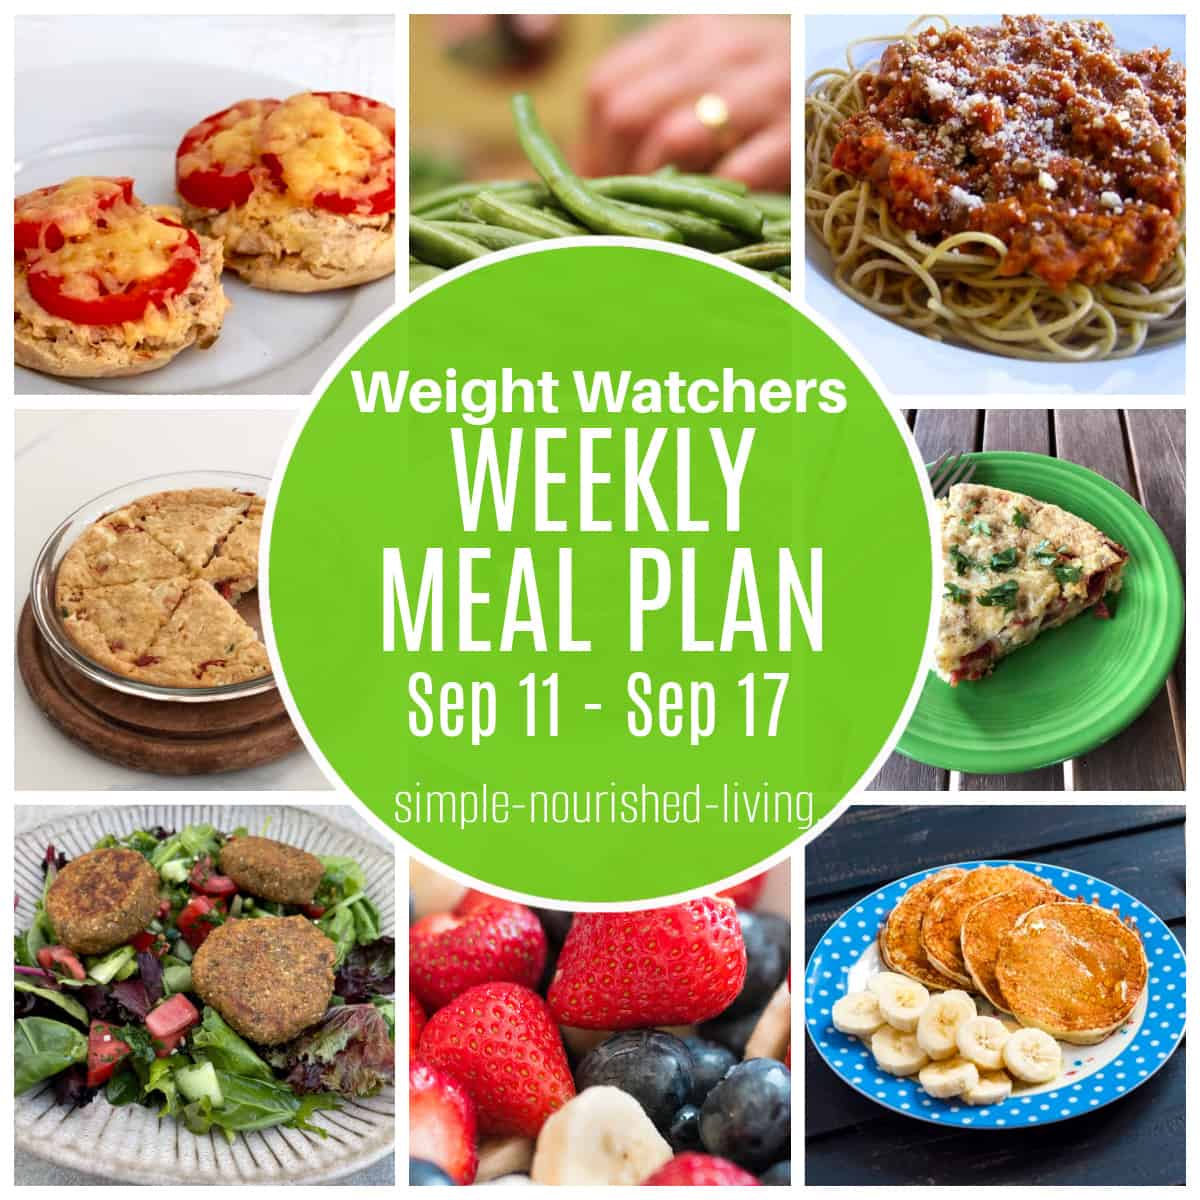 9 frame food photo collage featuring: tuna melts on english muffins, green beans, spaghetti sauce on pasta, zucchini pie, falafel salad, fresh berries and banana pancakes. Round green text box overlay in the center: Weight Watchers Weekly Meal Plan Sep 11 - Sep 17 